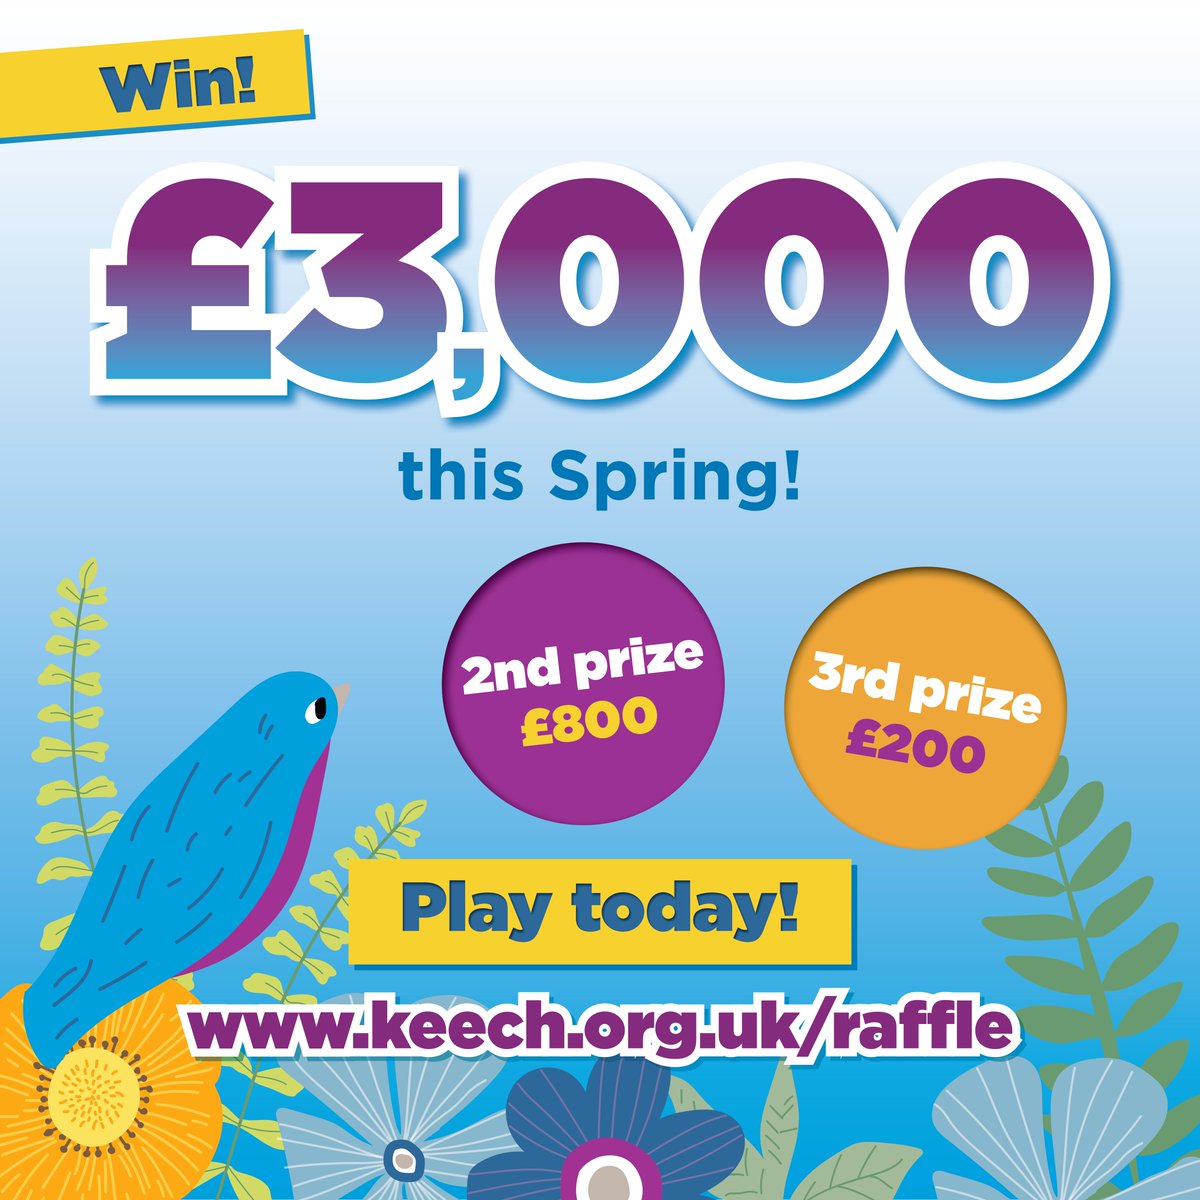 Last chance to enter our Spring Raffle! 🐣 You could win £3,000 so what are you waiting for? ➡️ bit.ly/springraffle24… Your support will allow us to continue supporting children and adults with life-limiting illnesses as well as their loved ones, so thank you. 💜💙